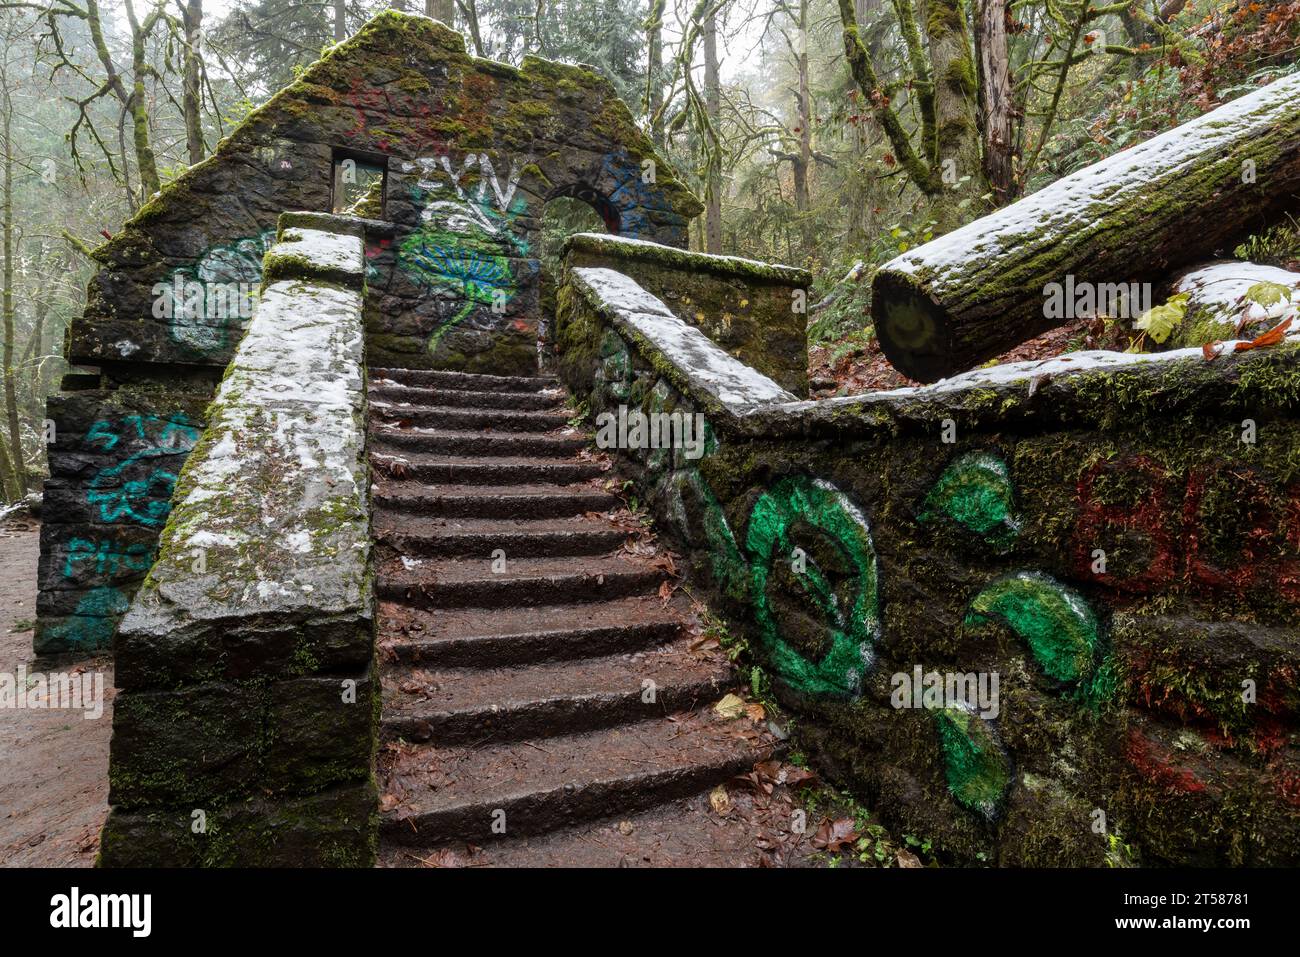 Old public bathroom, known as 'Witch's Castle', in Portland Oregon's Forest Park. Stock Photo